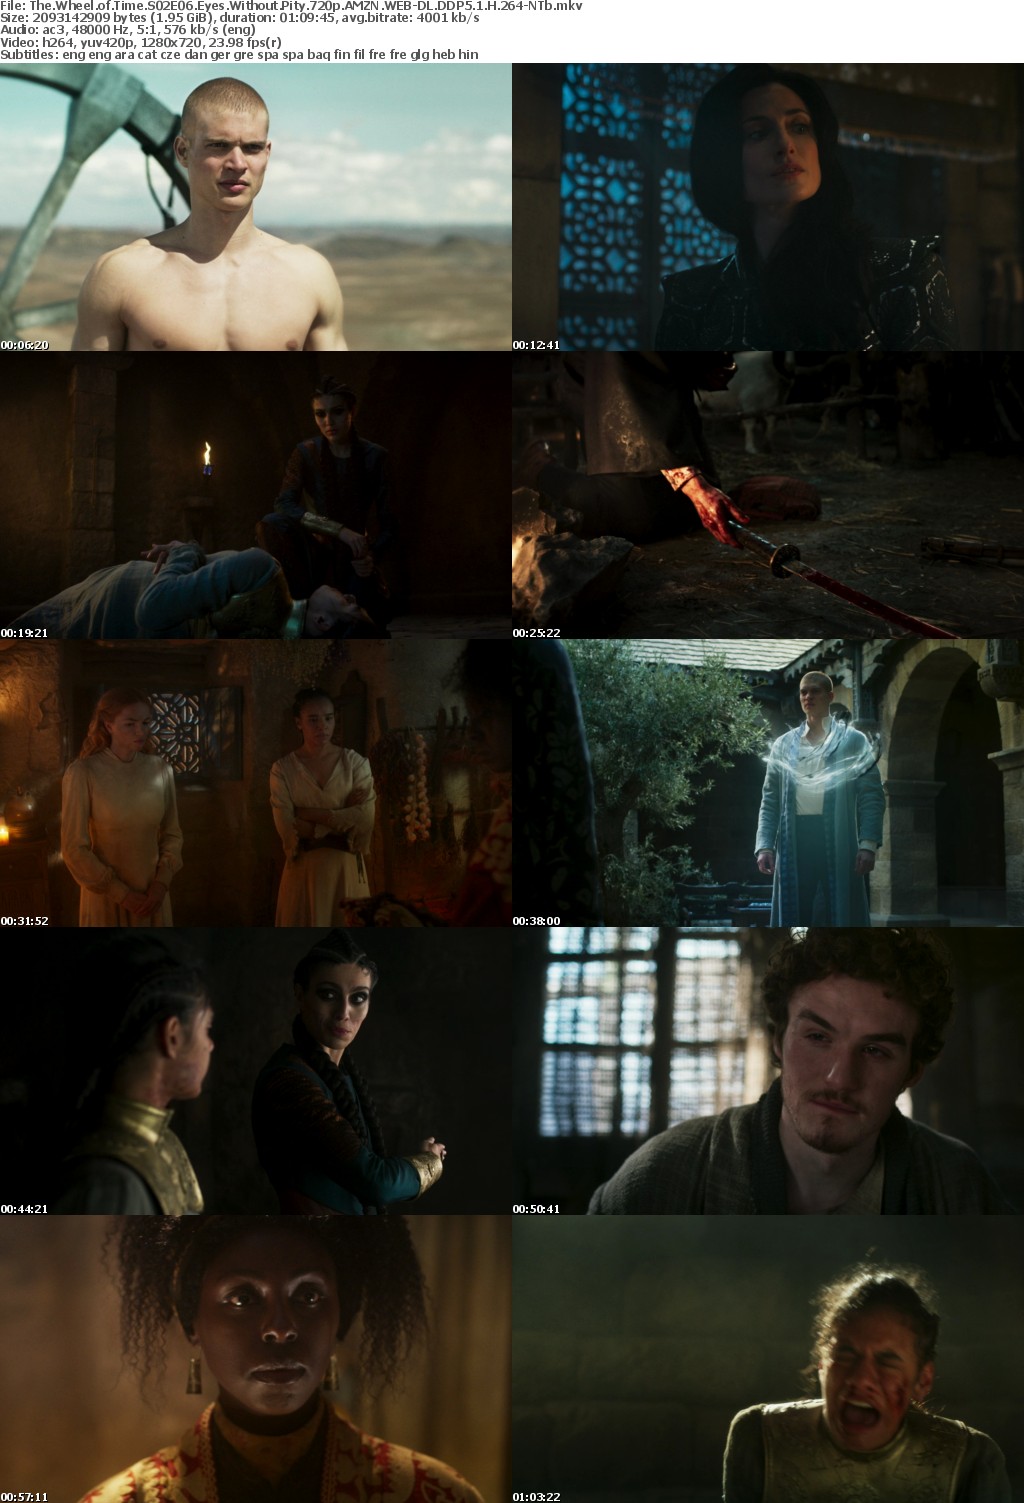 The Wheel of Time S02E06 Eyes Without Pity 720p AMZN WEB-DL DDP5 1 H 264-NTb